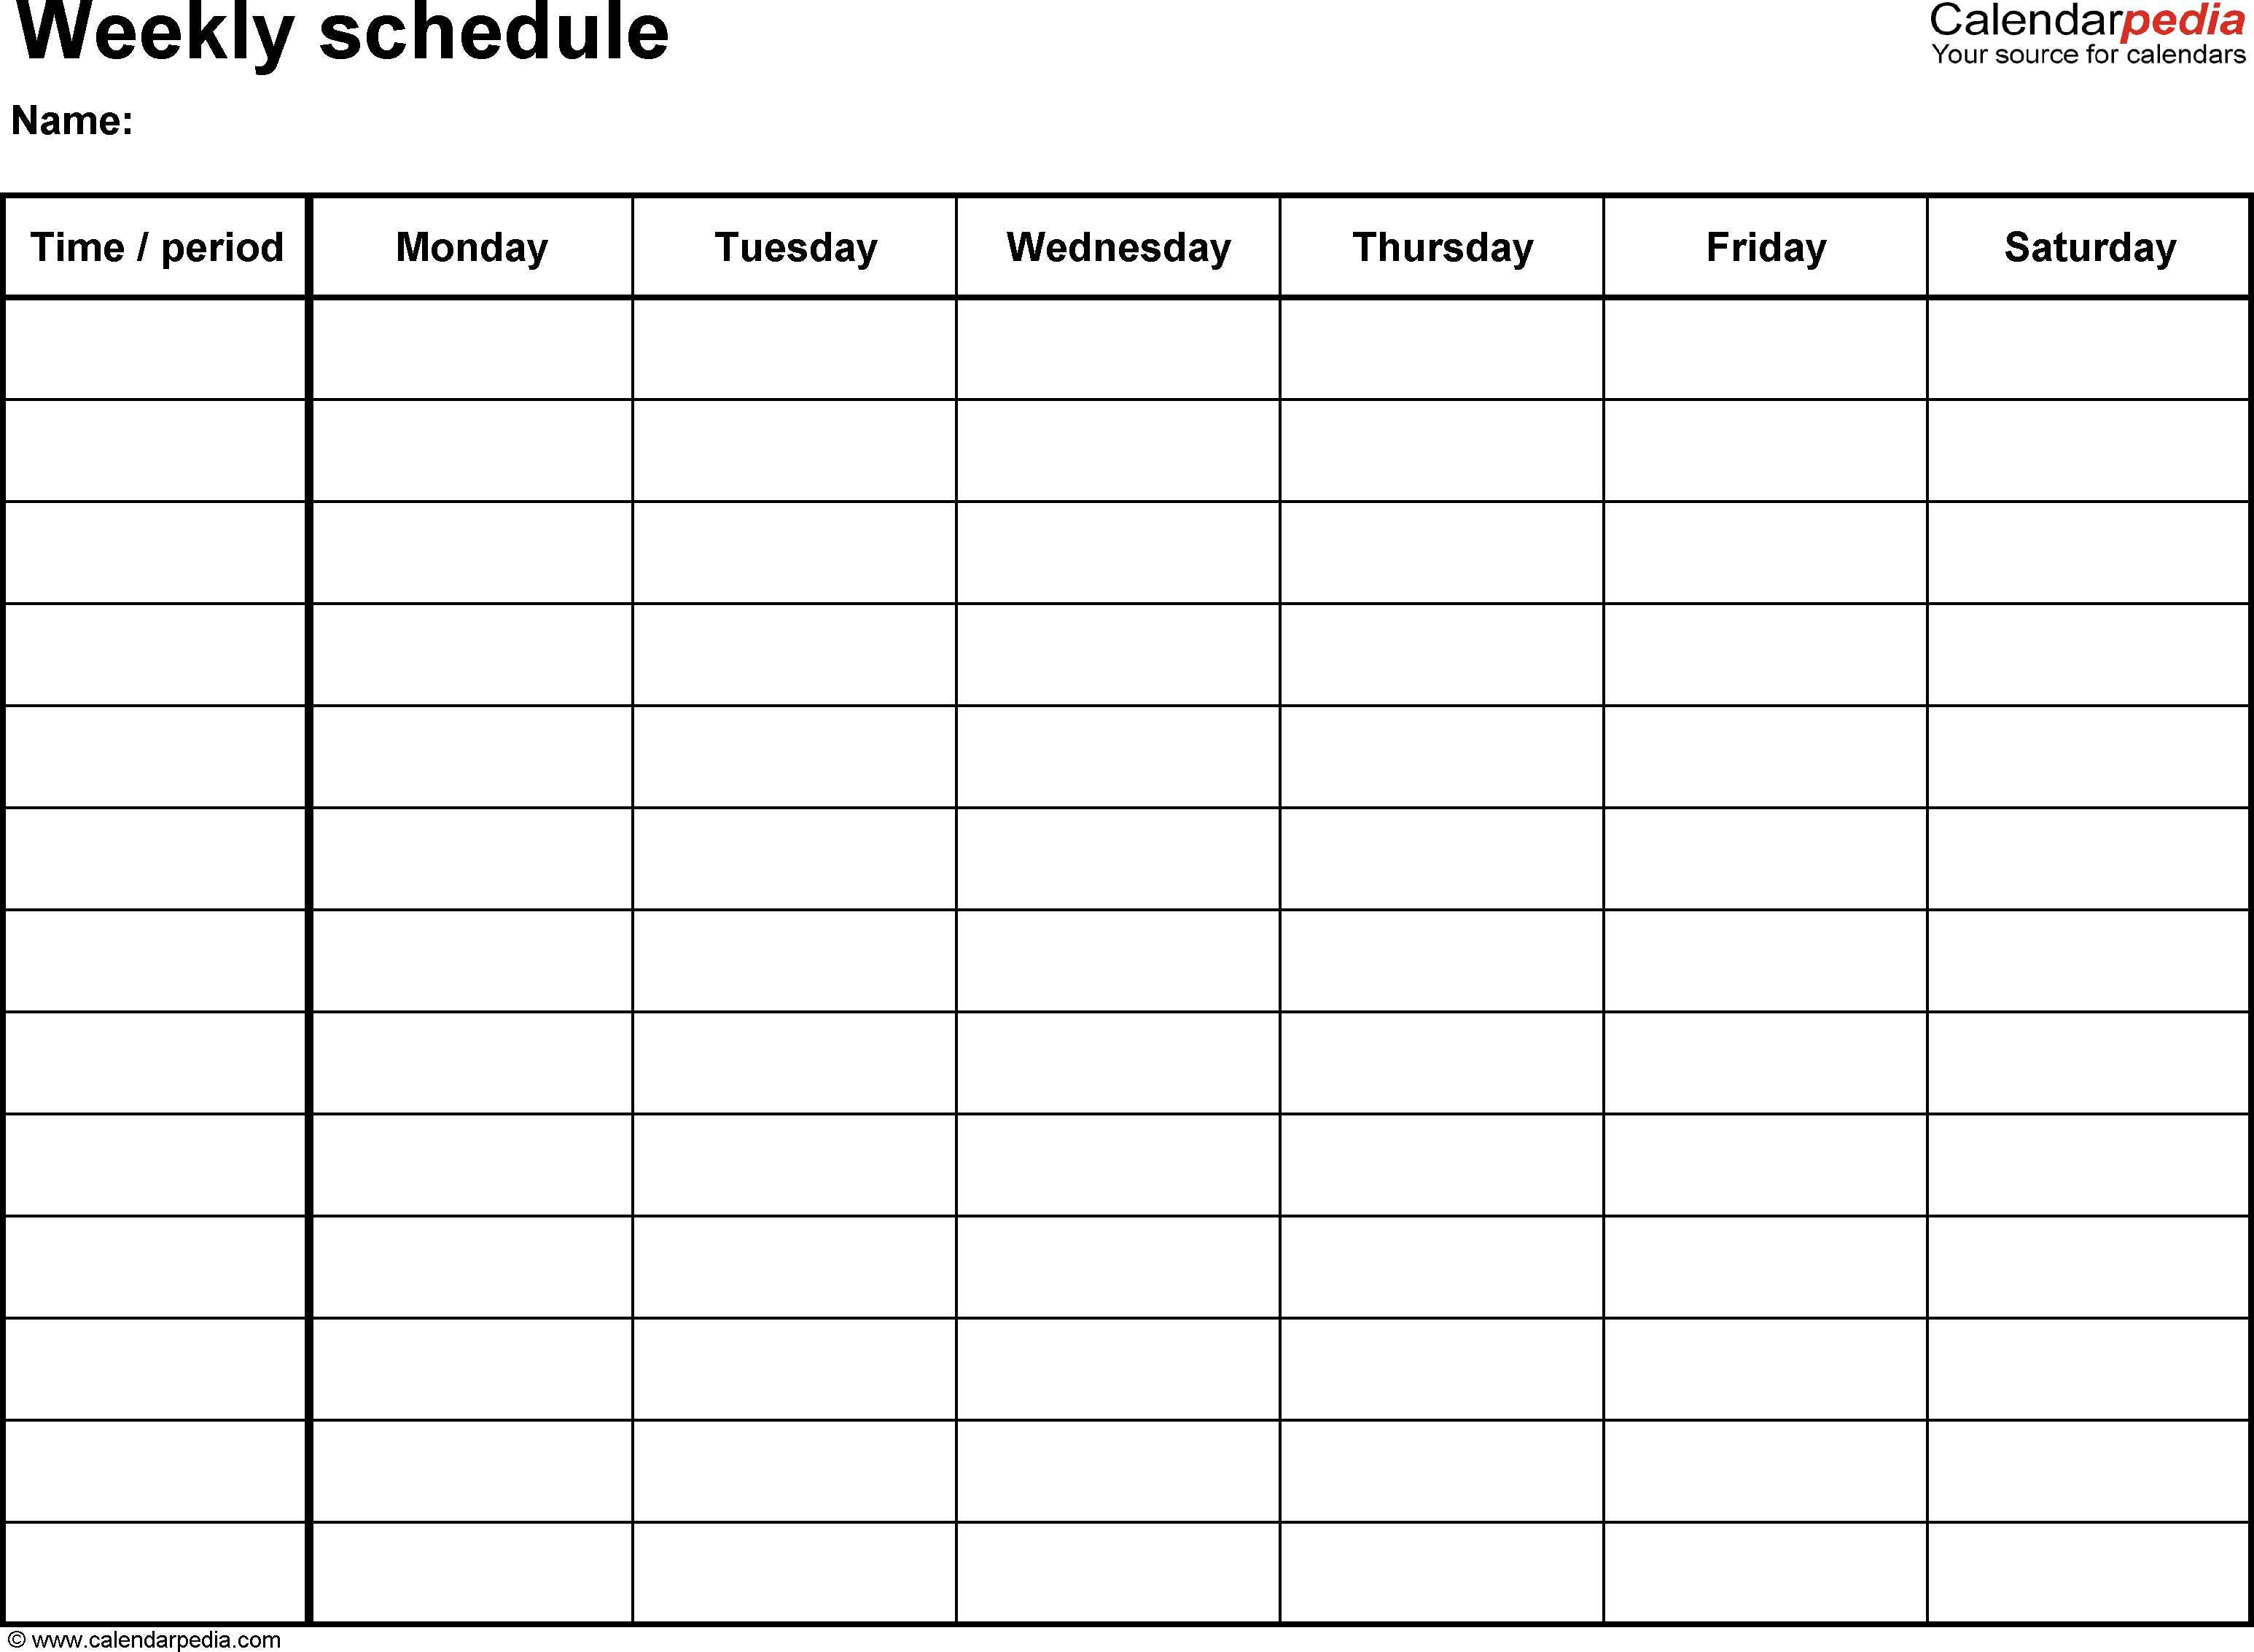 Free Weekly Schedule Templates For Word - 18 Templates-Monday - Friday Timetable Template